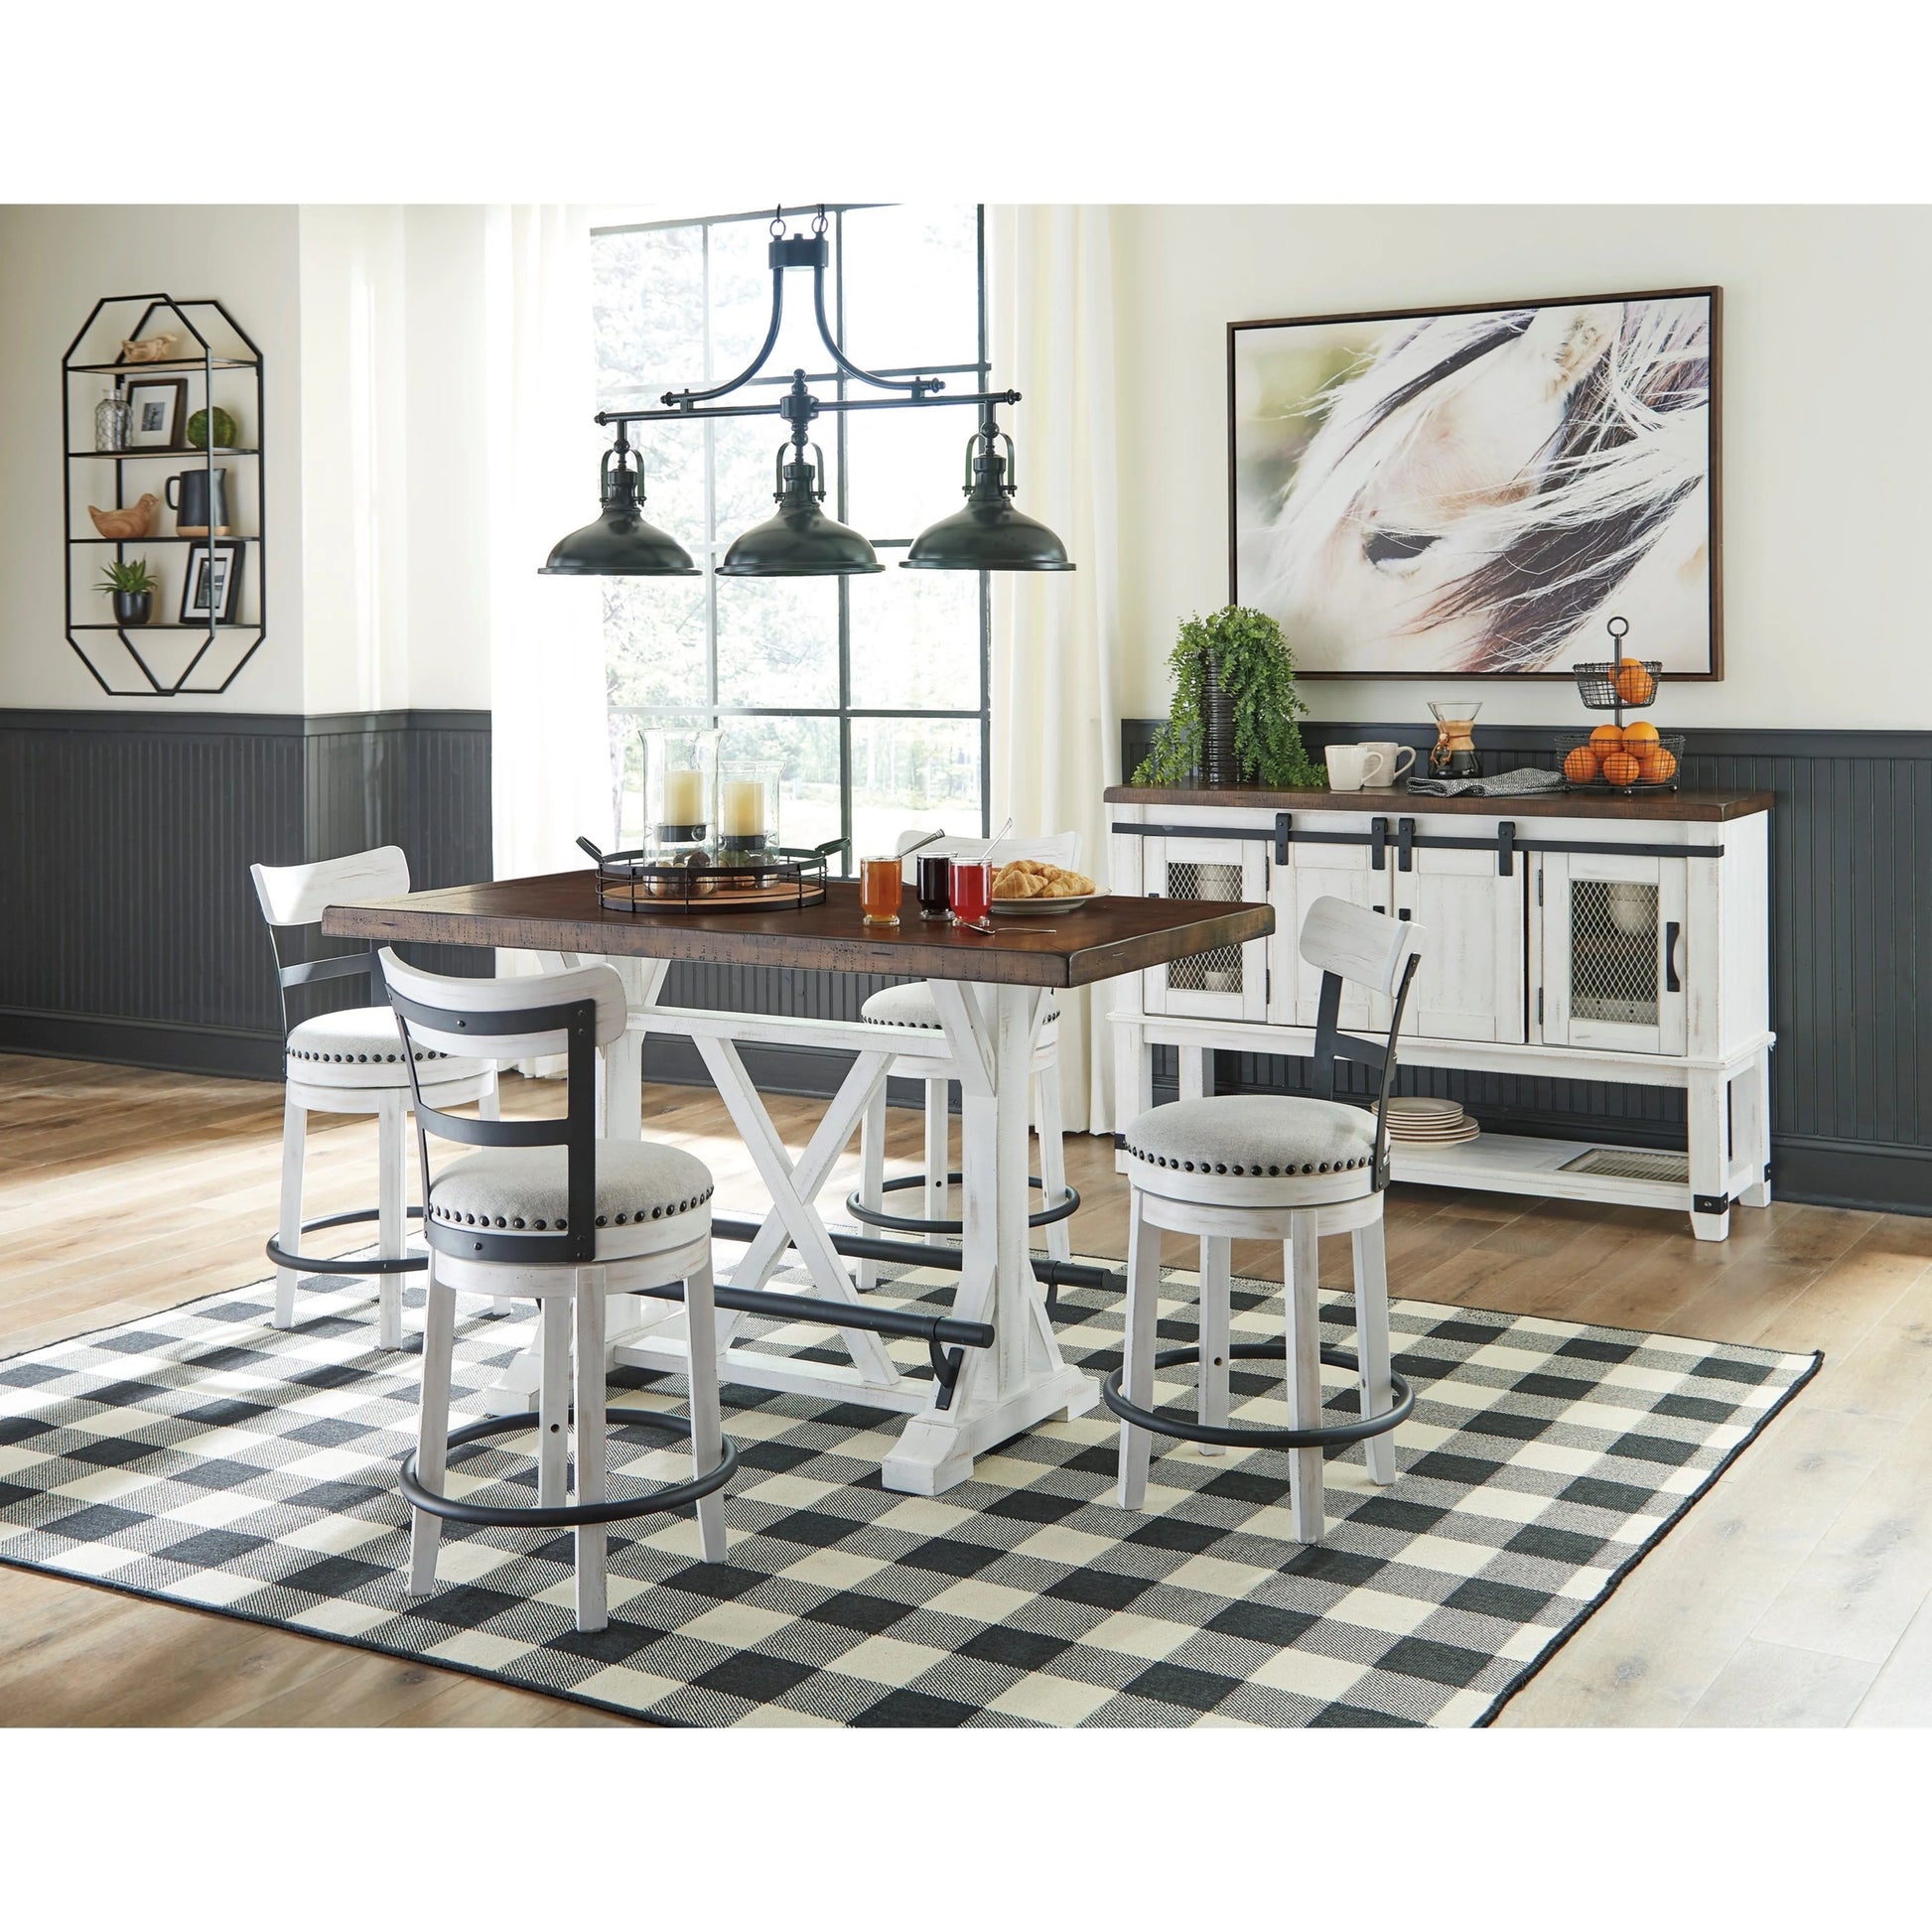 Valebeck Counter Height Dining Set with 6 Barstools Ashley